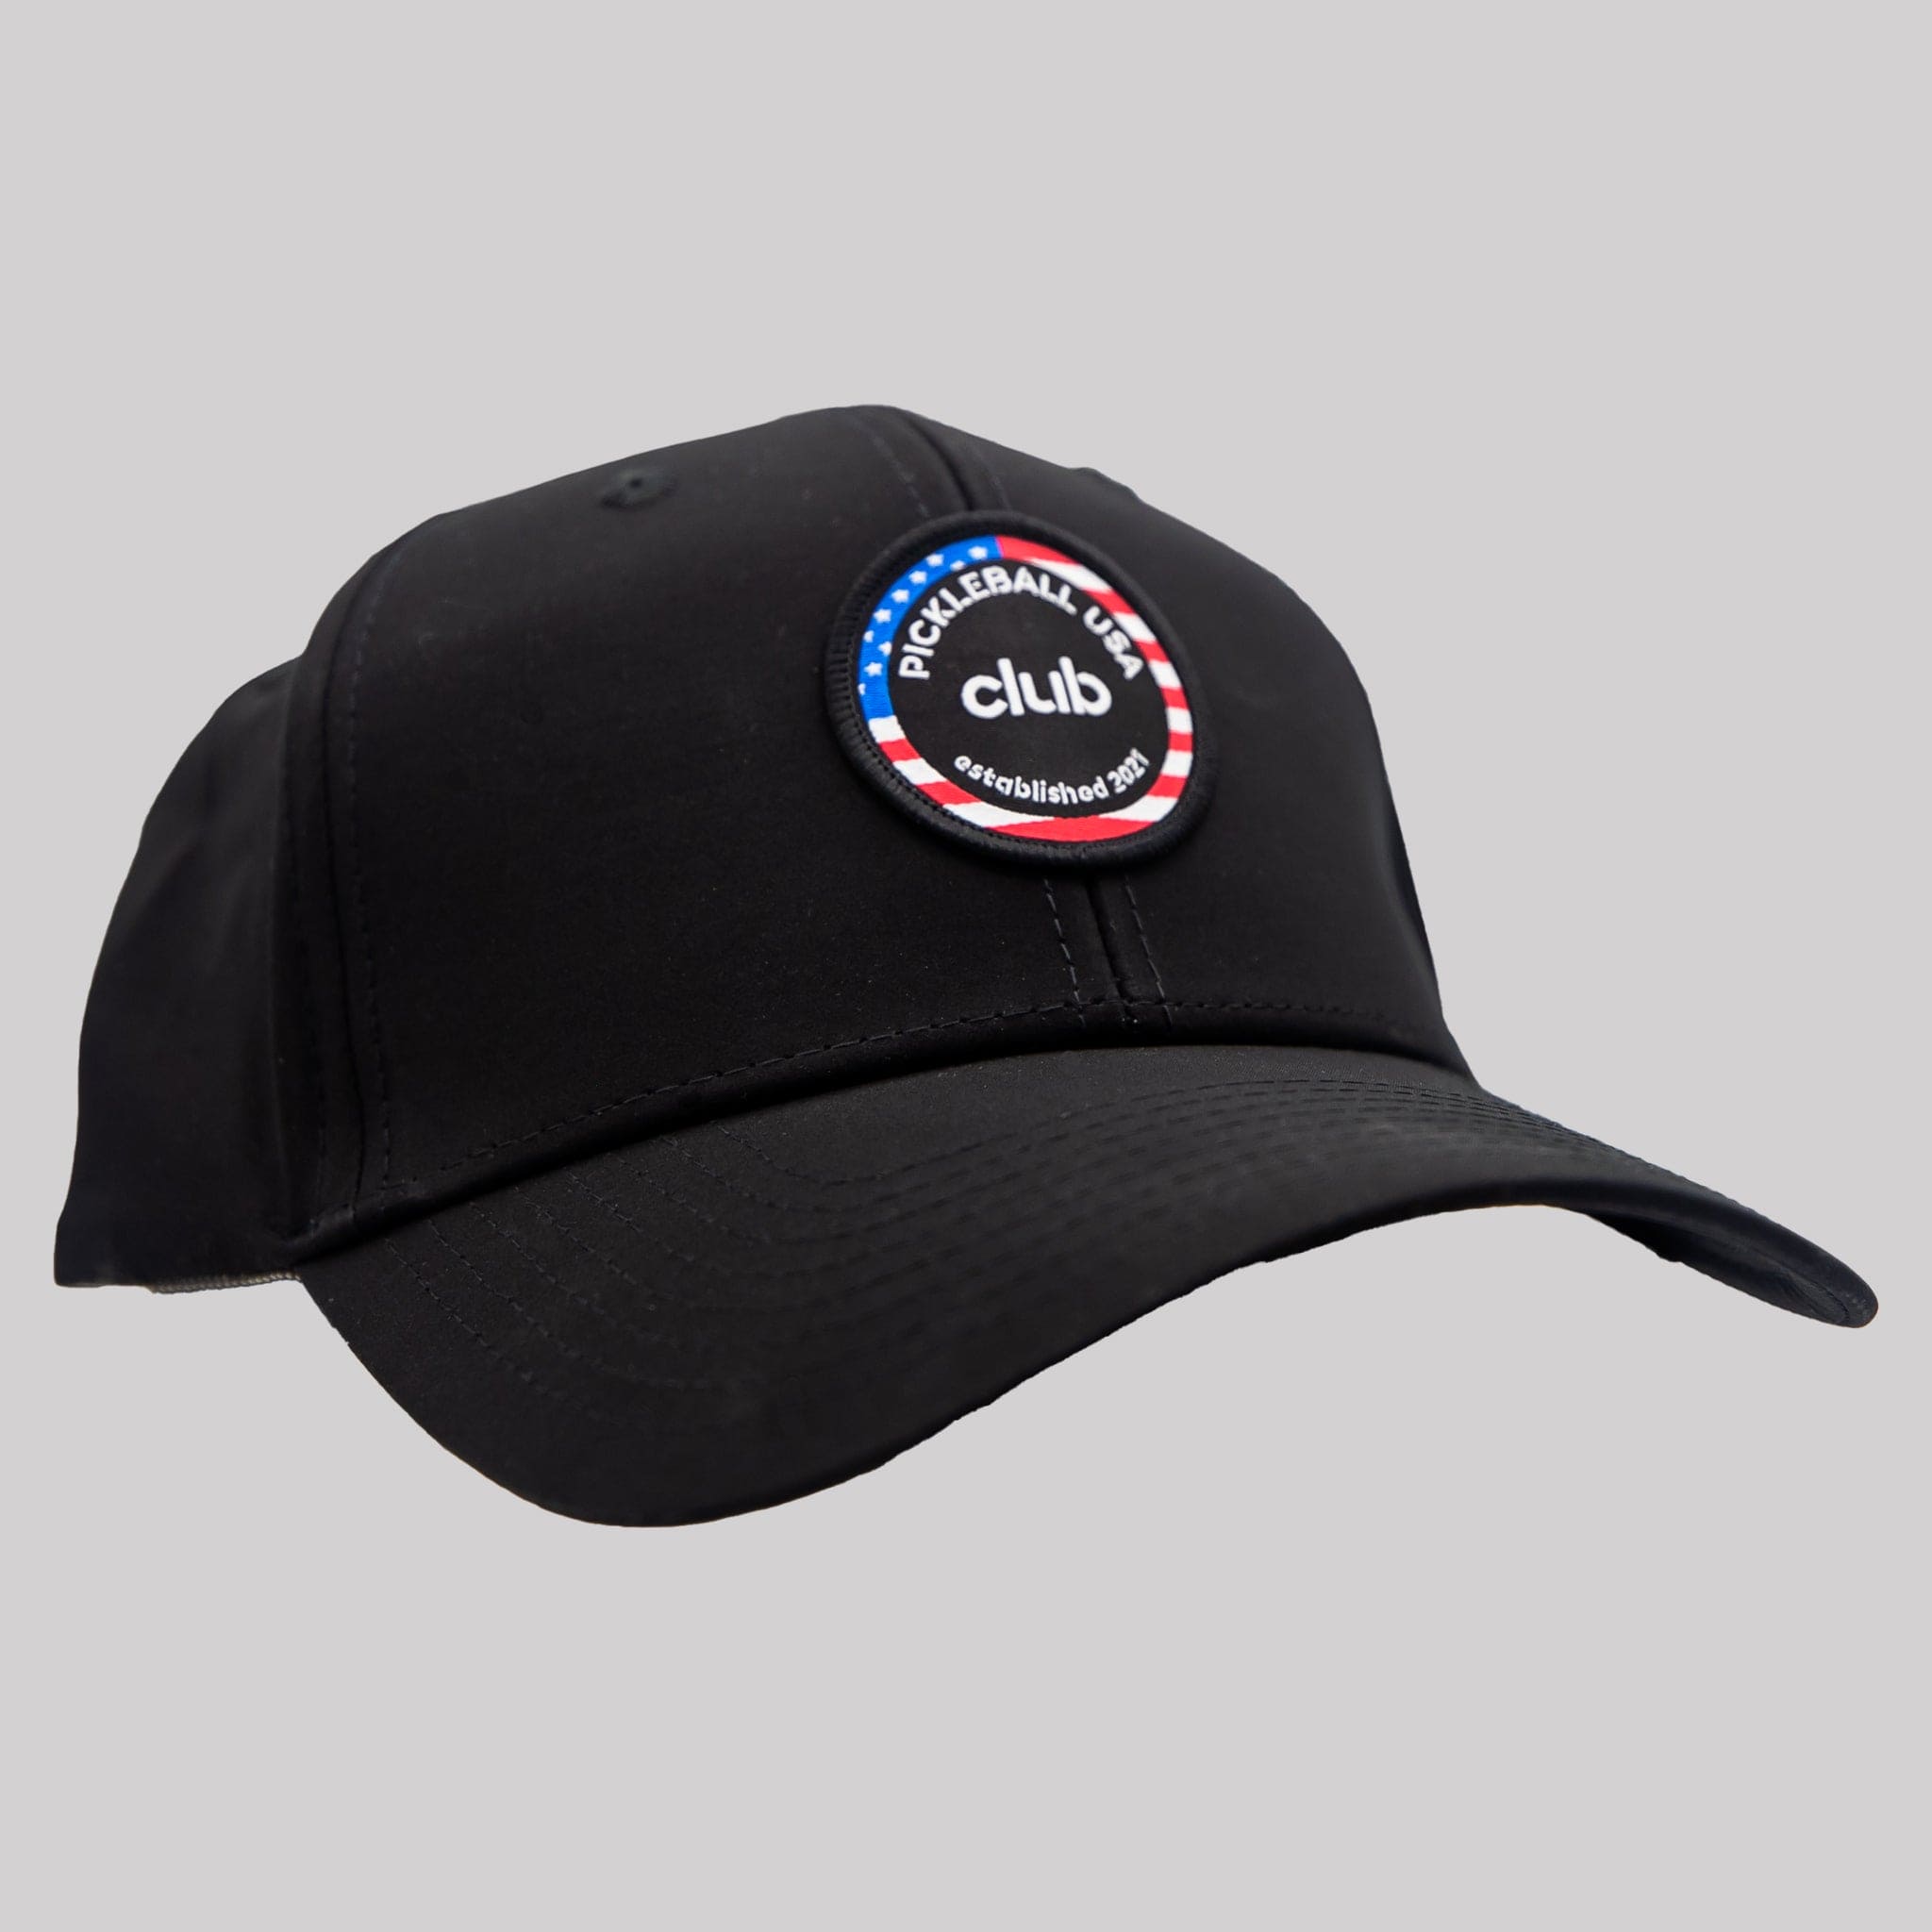 New Club Hat - Black with Red White and Blue Patch